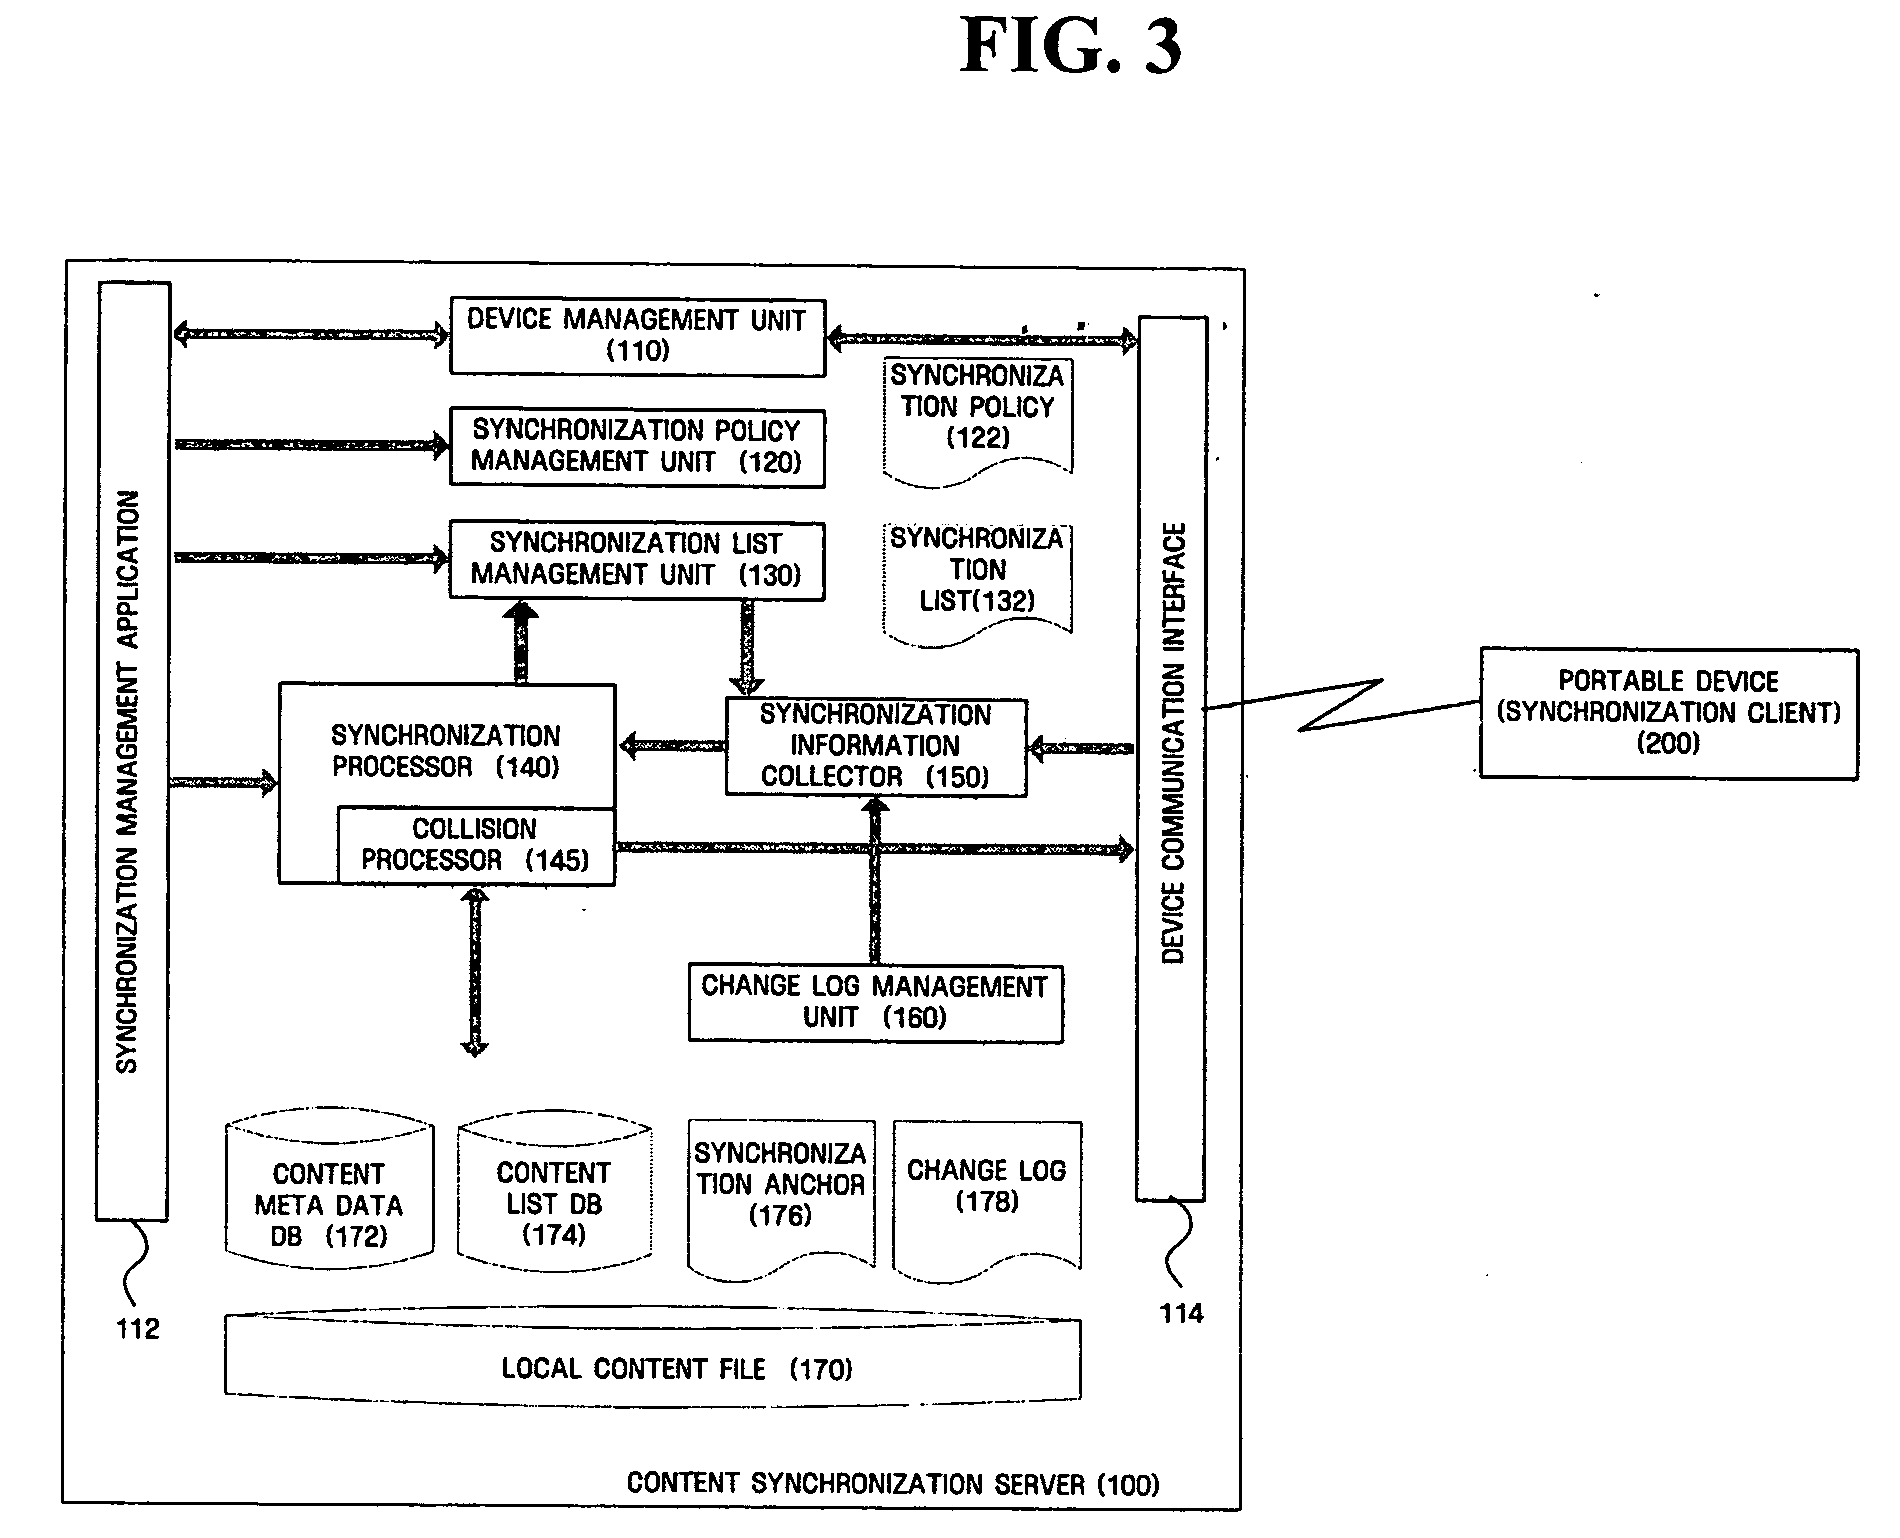 Method and apparatus for synchronizing multimedia content with device which supports multi-server environment